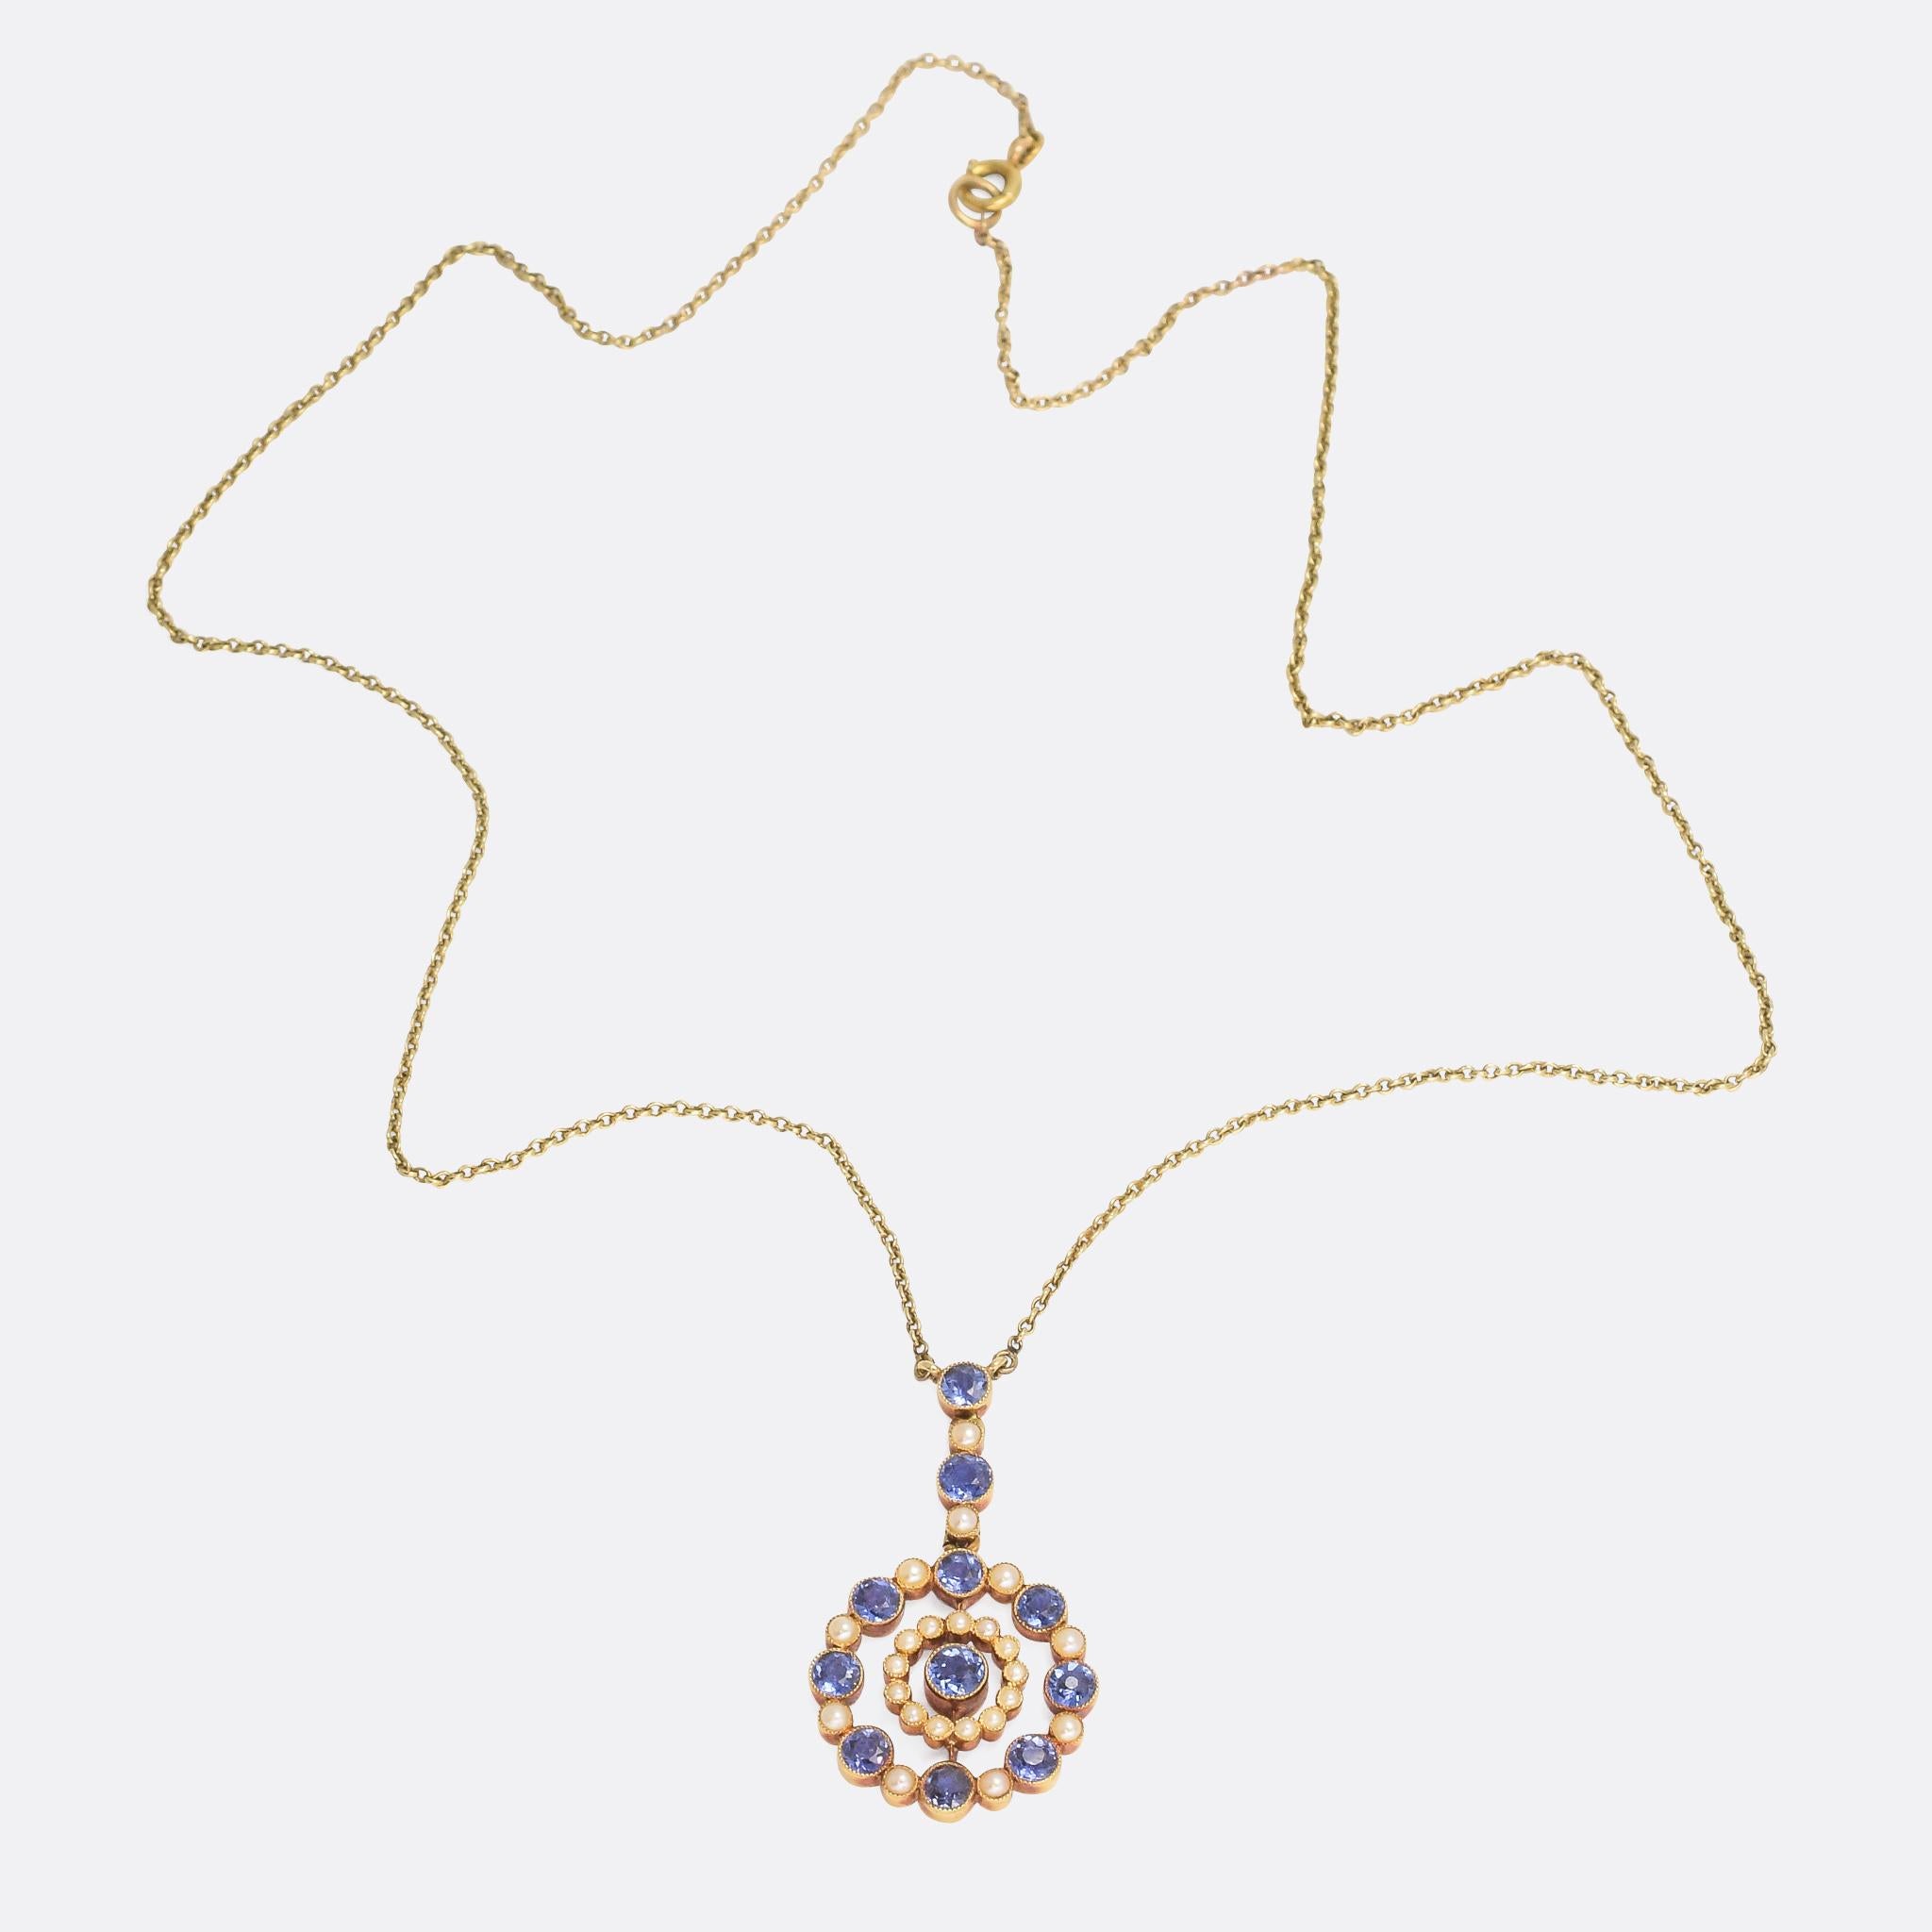 An exquisite antique necklace; the pendant is set with cornflower blue sapphires and natural pearls to form a double halo / target motif around the central stone. It's modelled in 15 karat yellow gold, with millegrain collet settings - all crafted